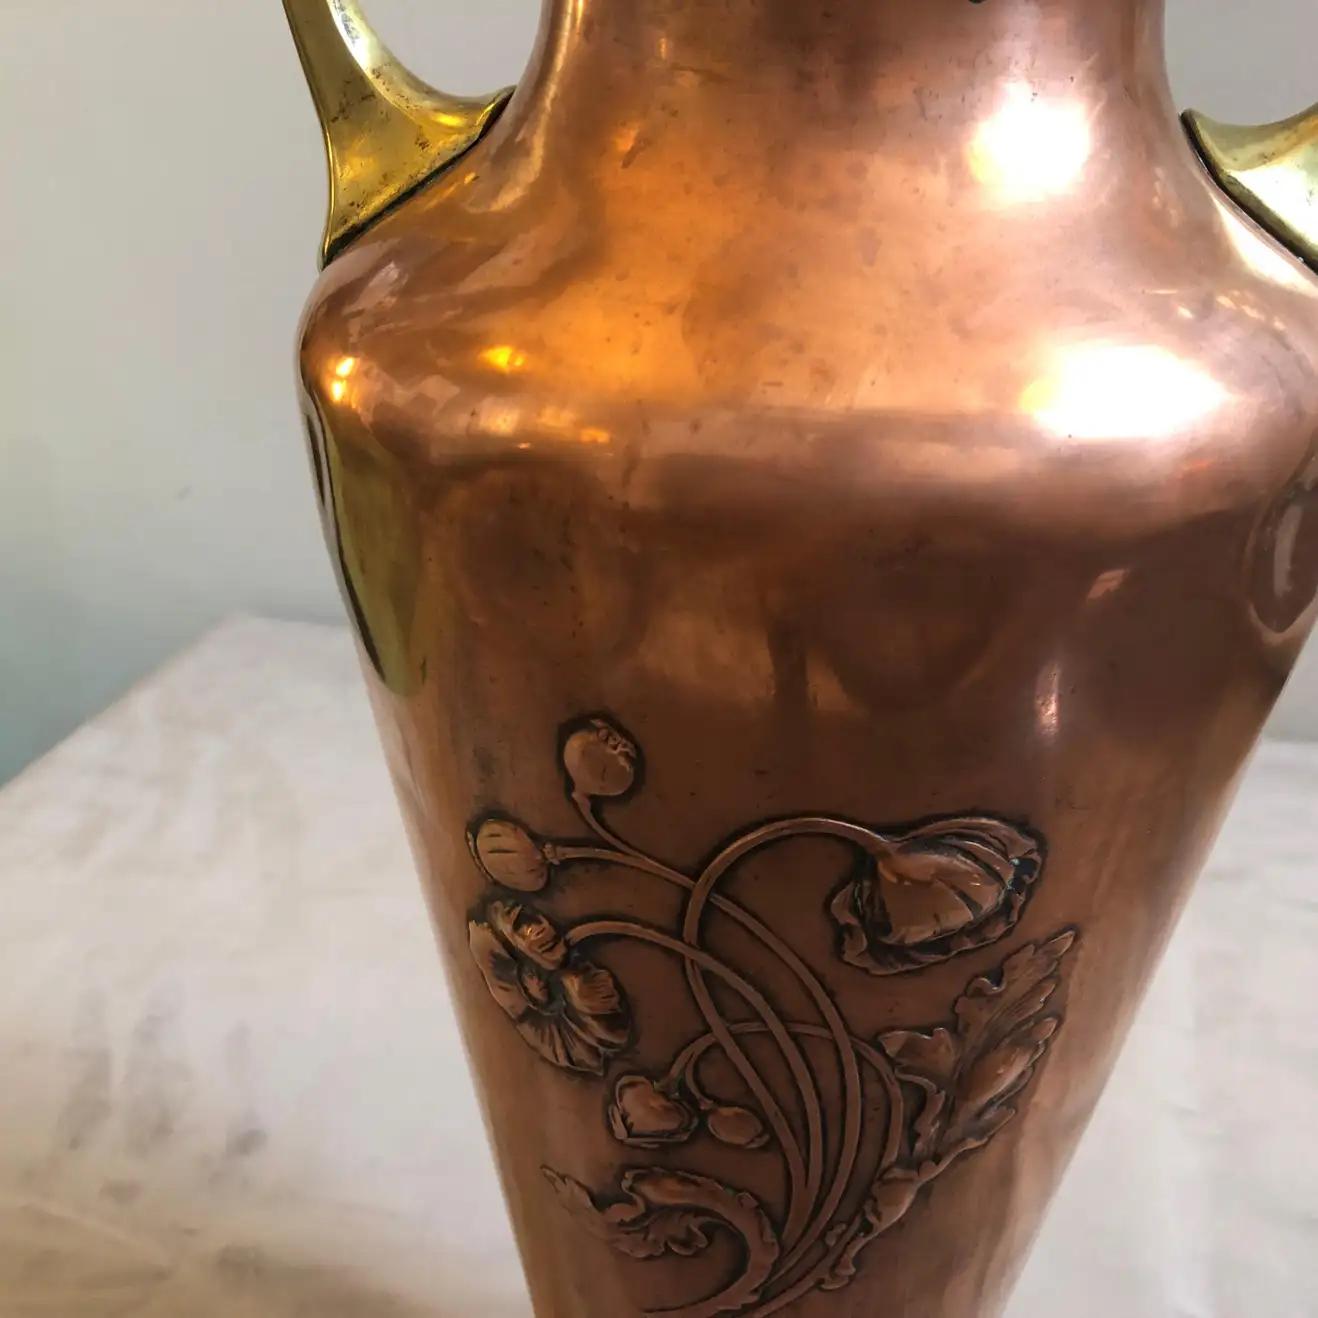 An Amphora vase made in Germany by WMF in 1900, it's an amazing example of Art Nouveau. It has normal signs of the use and the age.